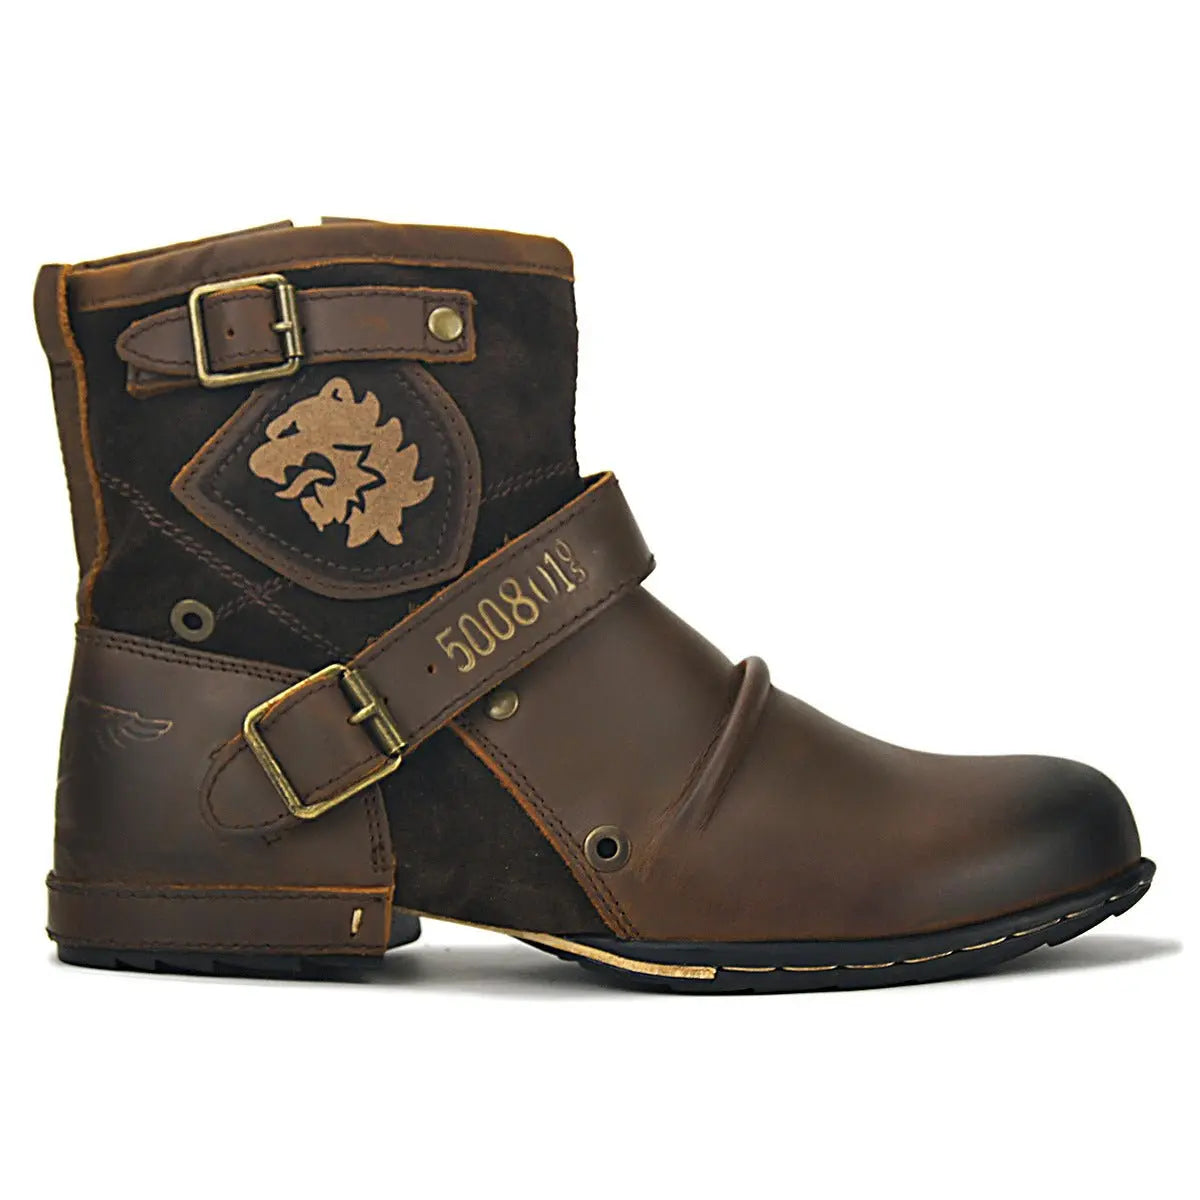 Leather Martin boots - Wamarzon